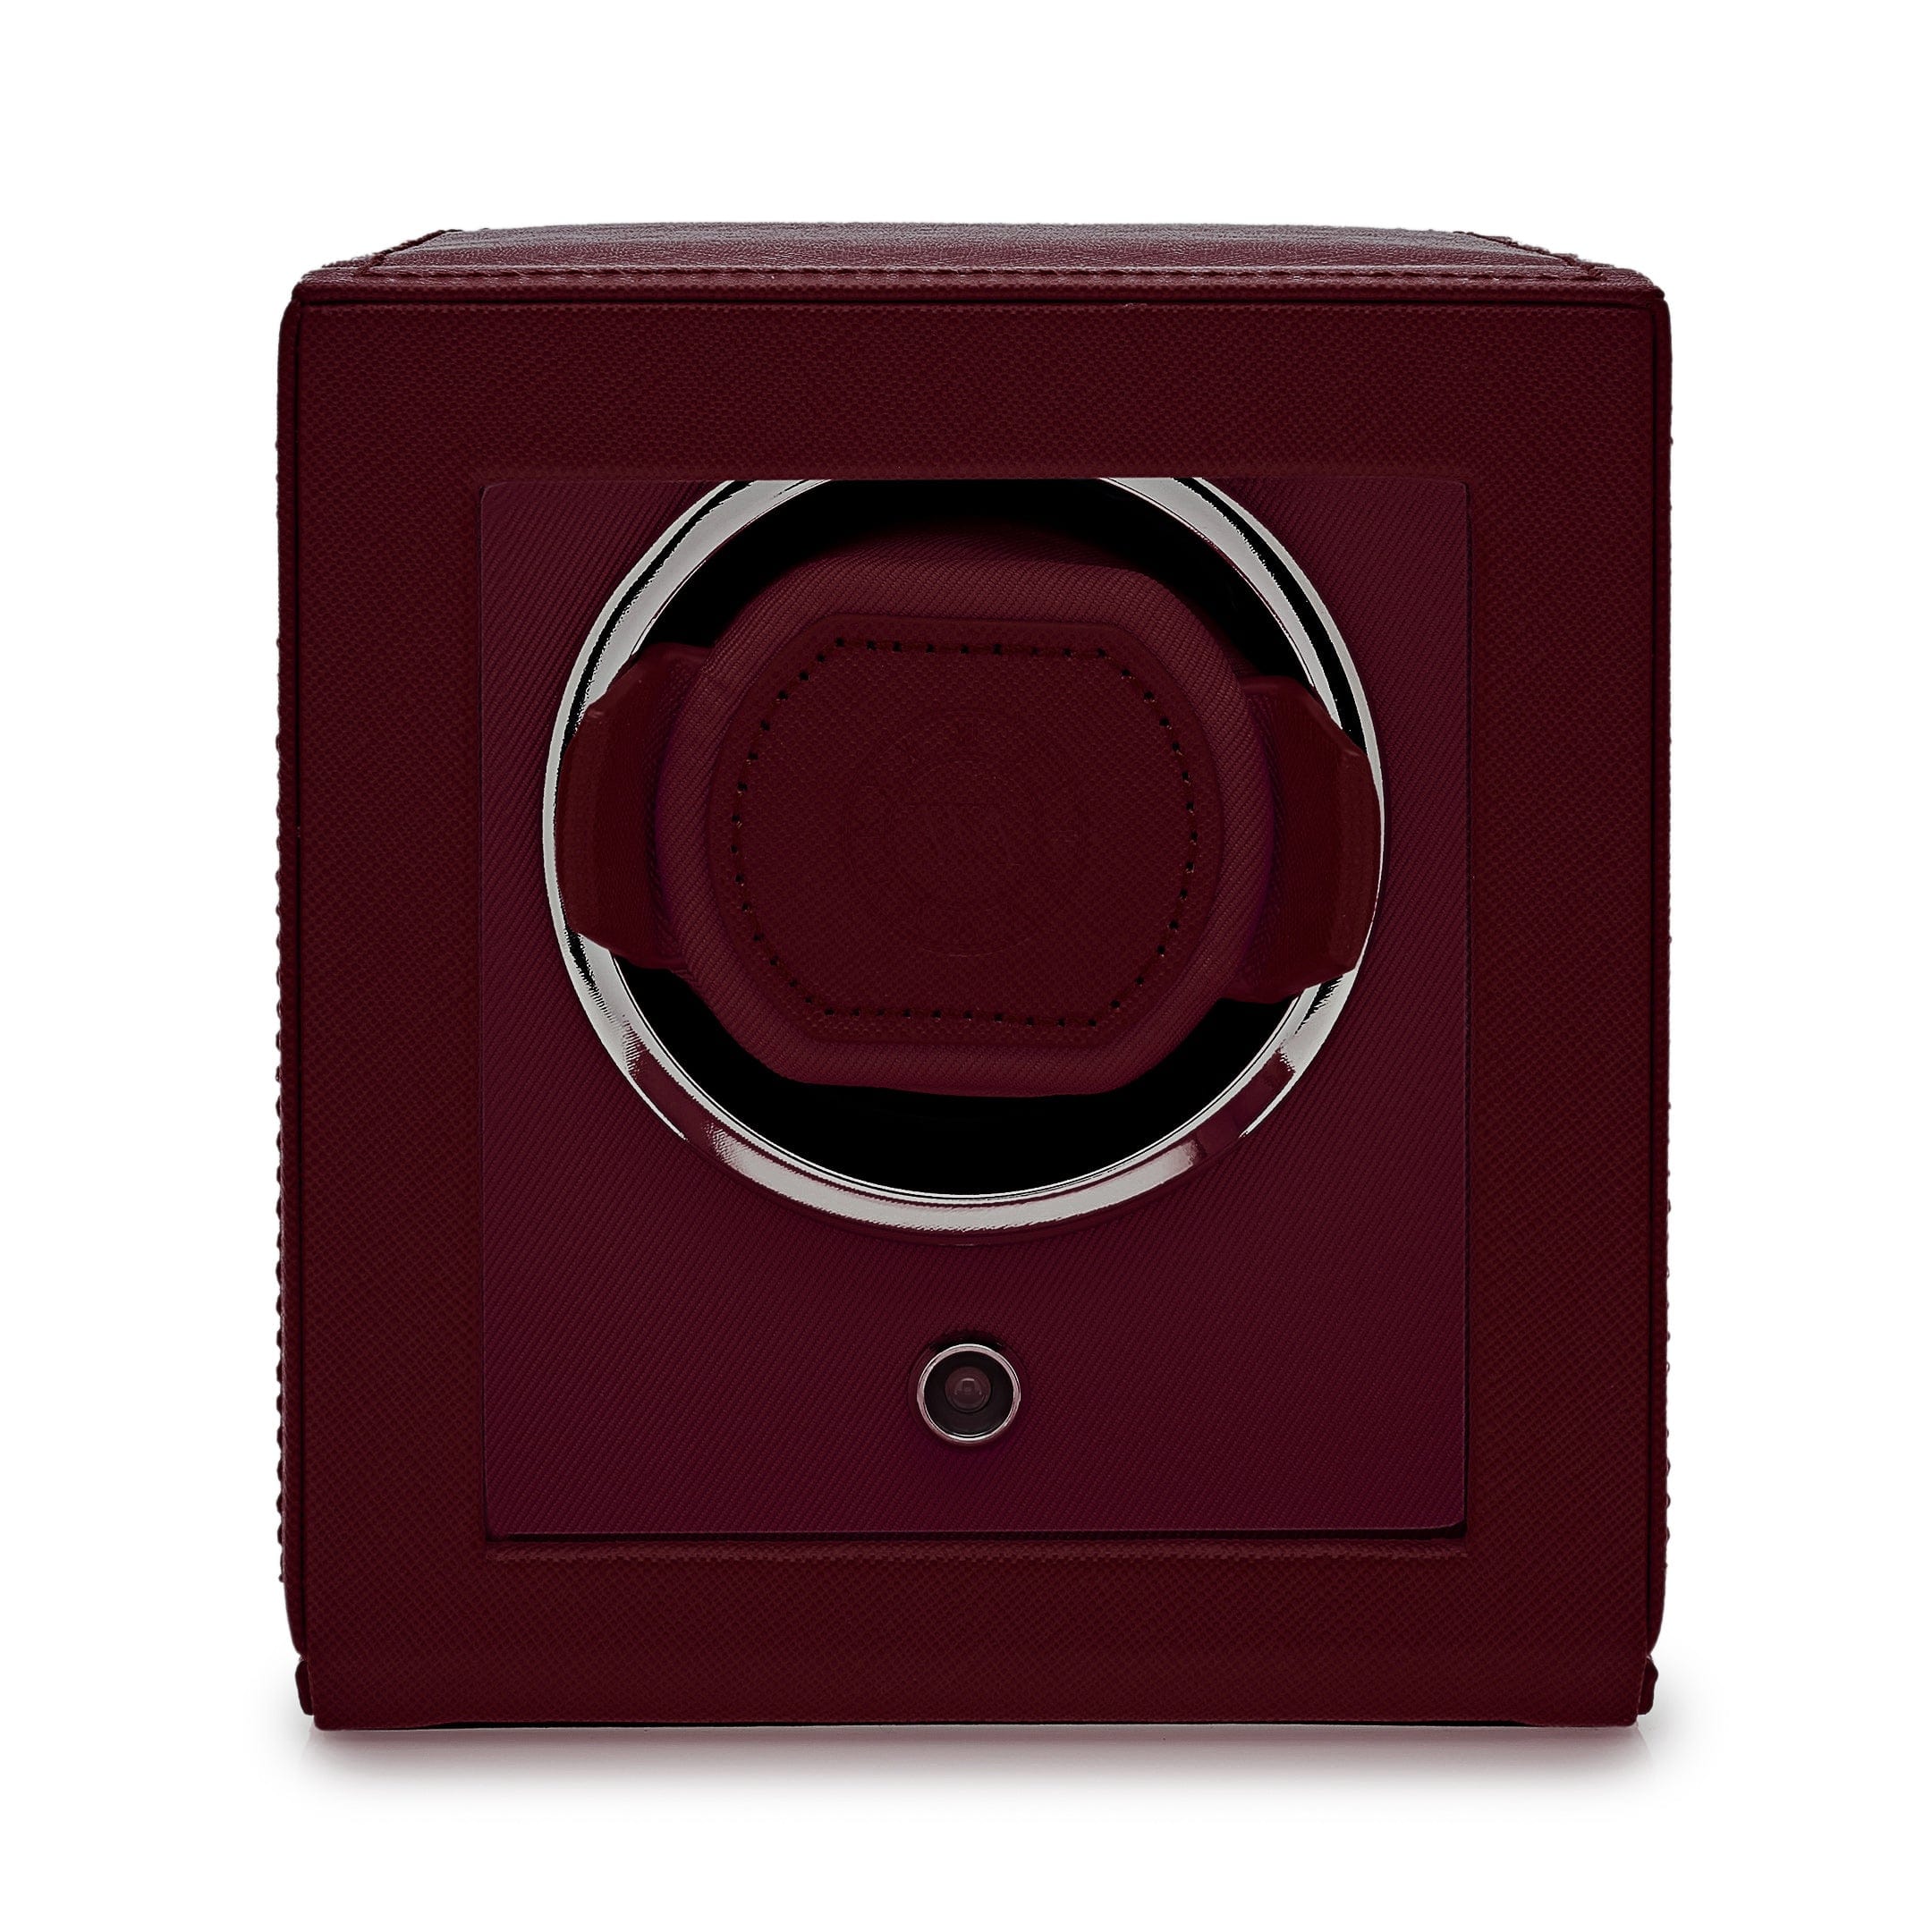 Cub Single Watch Winder with Cover - Bordeaux